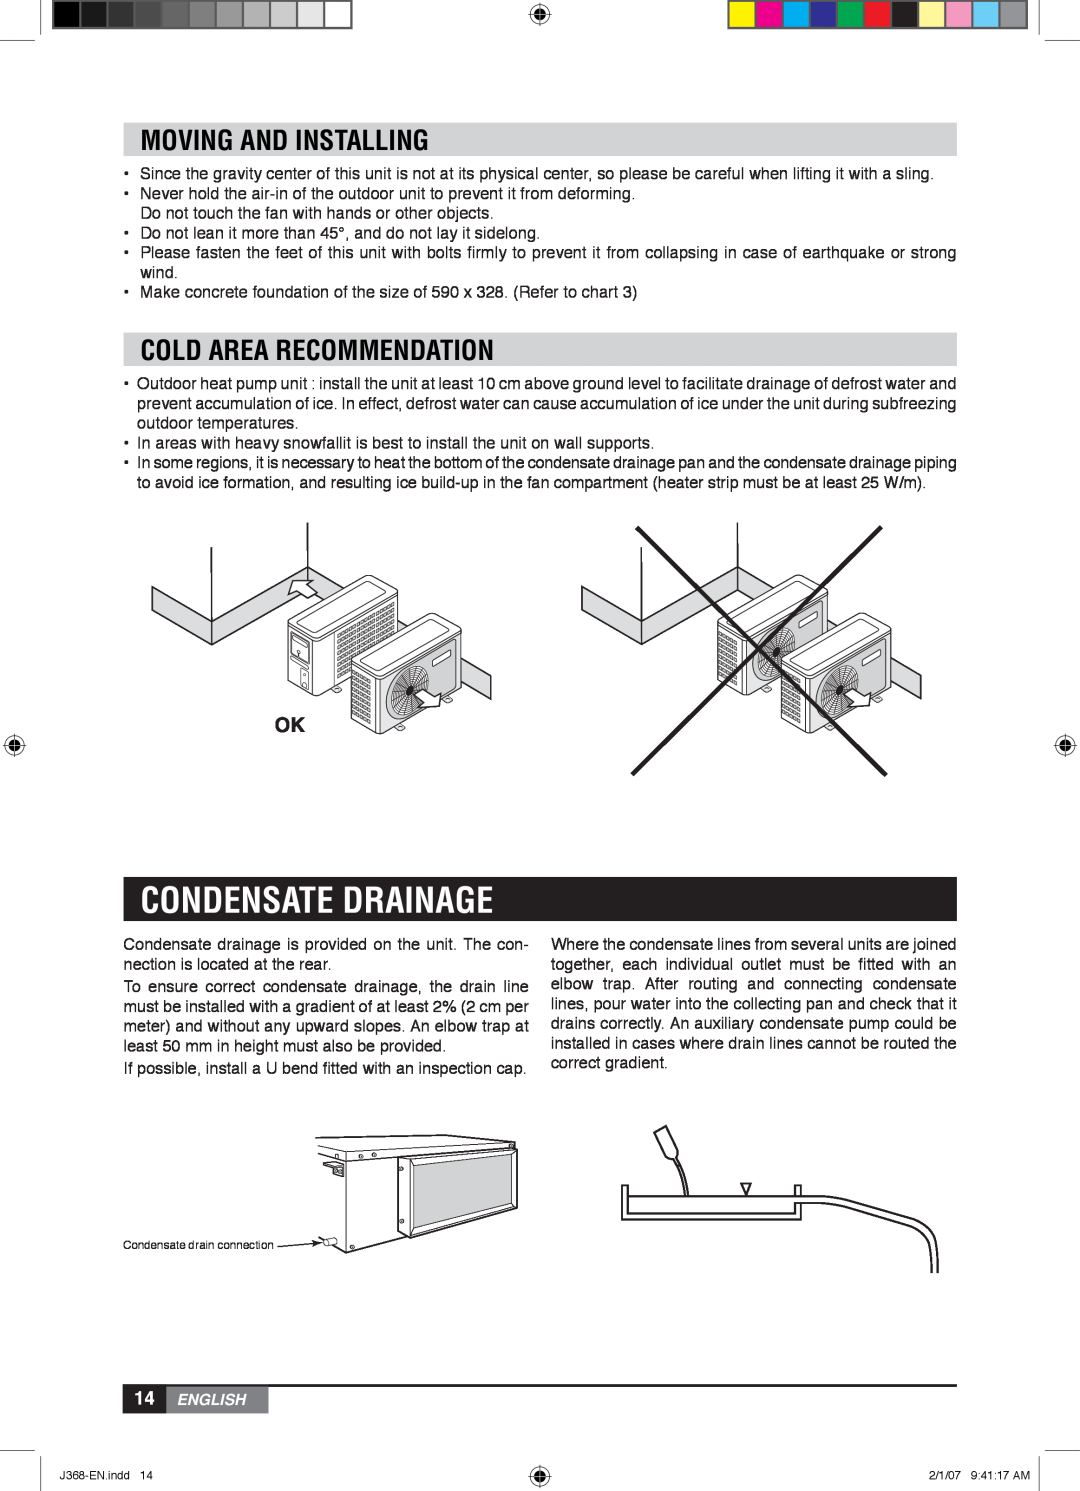 York YUHC 07-18, YUHC 18-60 owner manual Moving And Installing, Cold Area Recommendation, Condensate Drainage, 14ENGLISH 